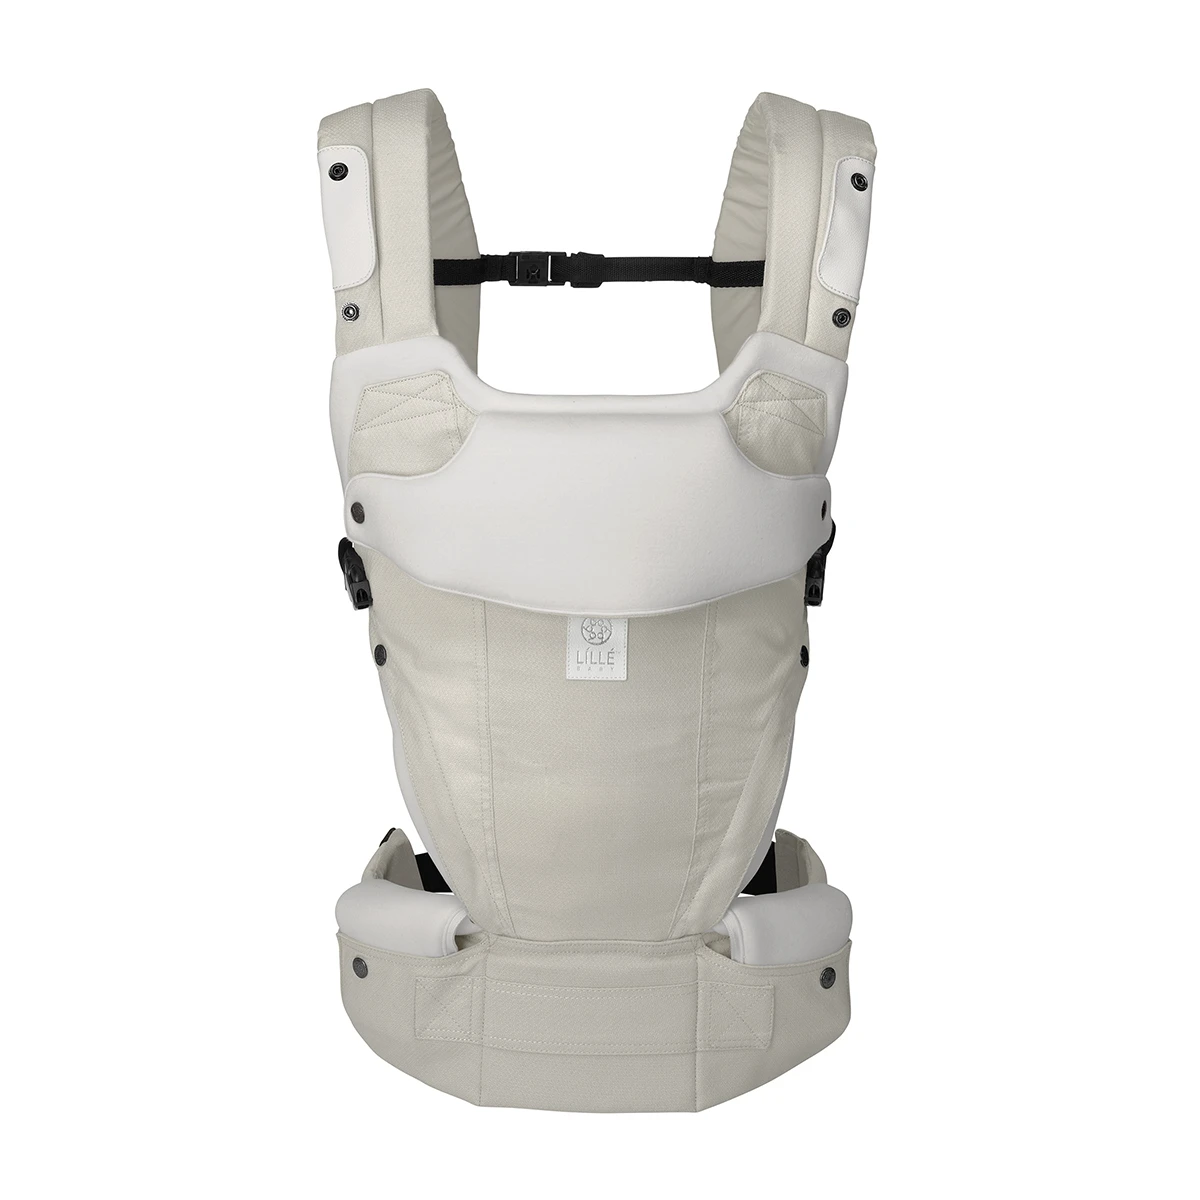 Elevate ivory carrier in narrow seat position